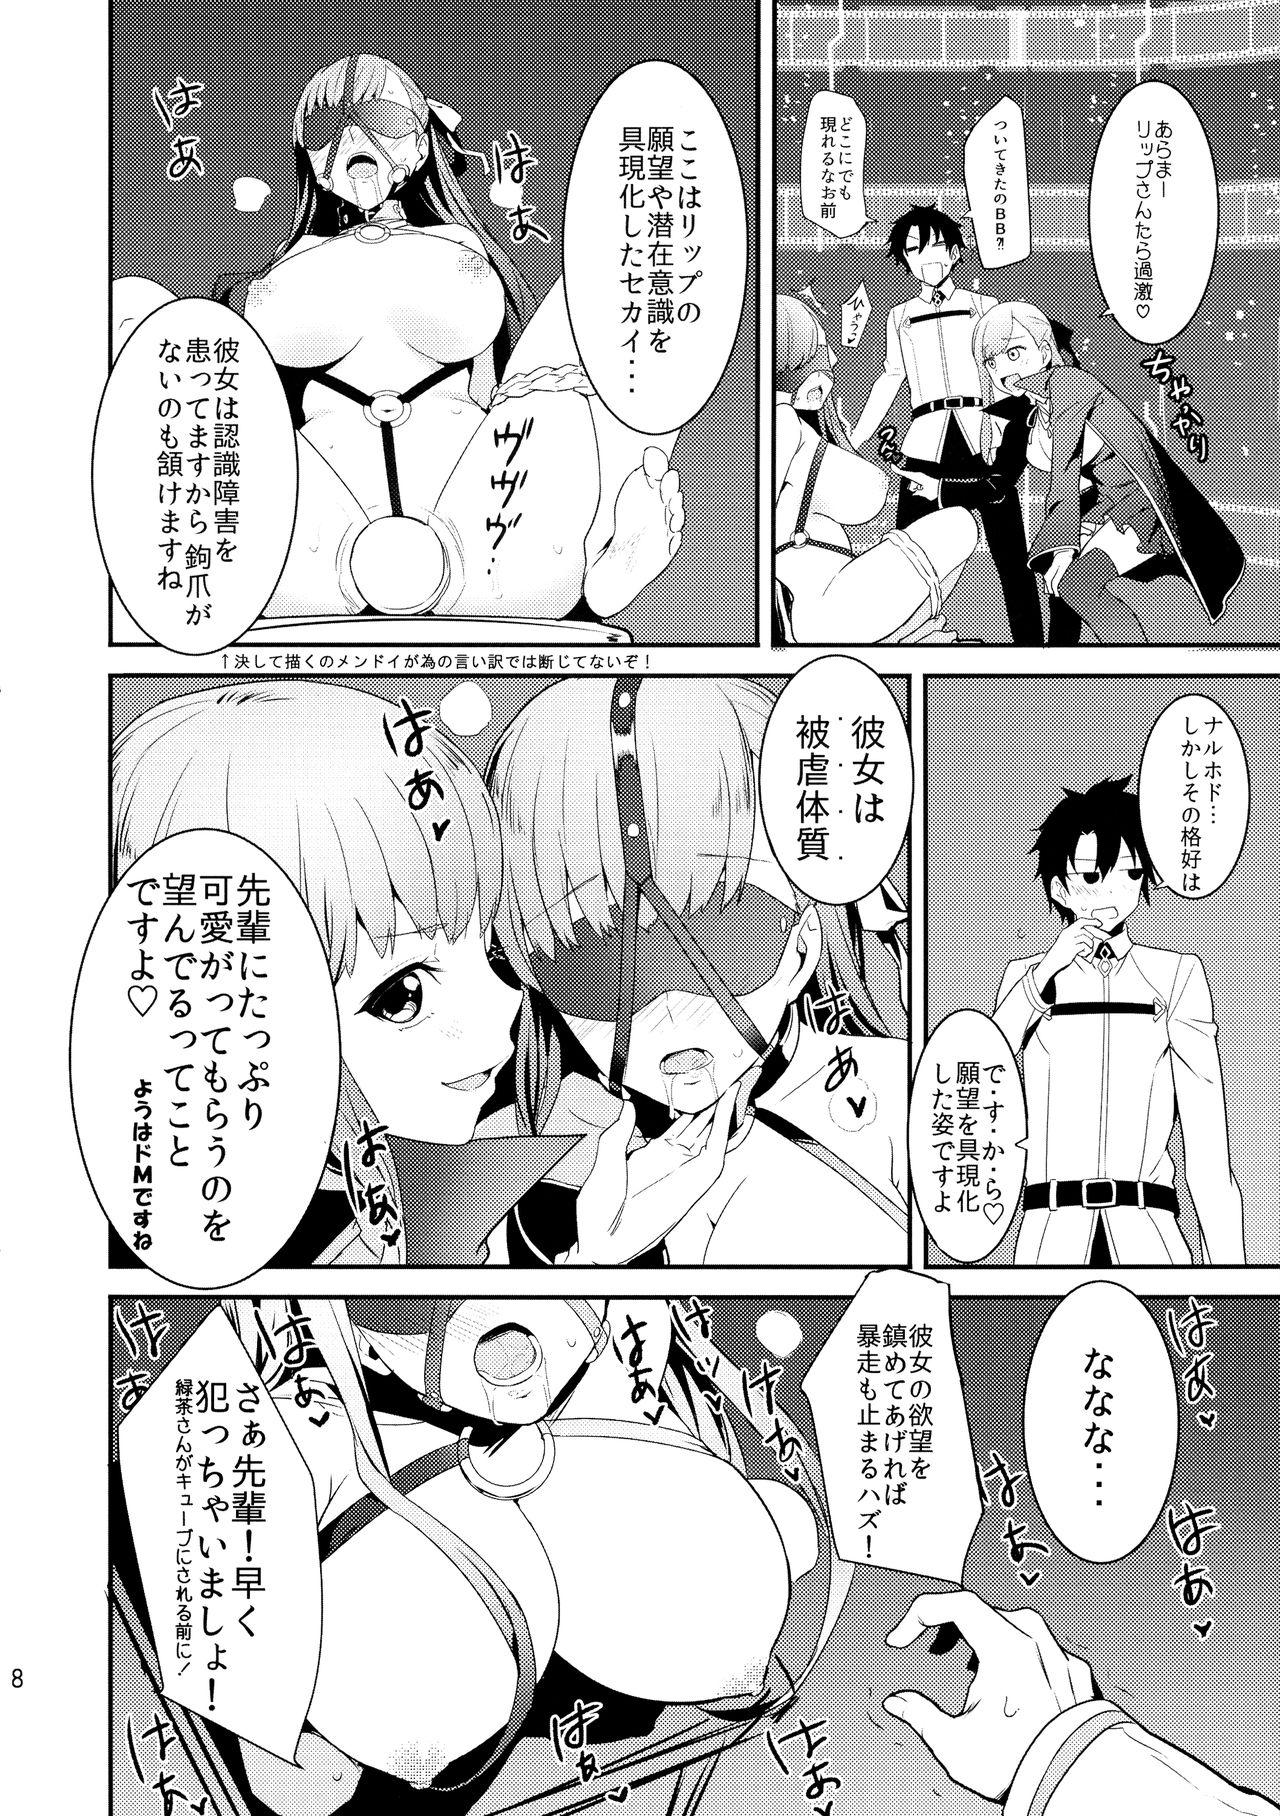 Rubia In the Passion, Melty heart. 1 - Fate grand order Spooning - Page 10